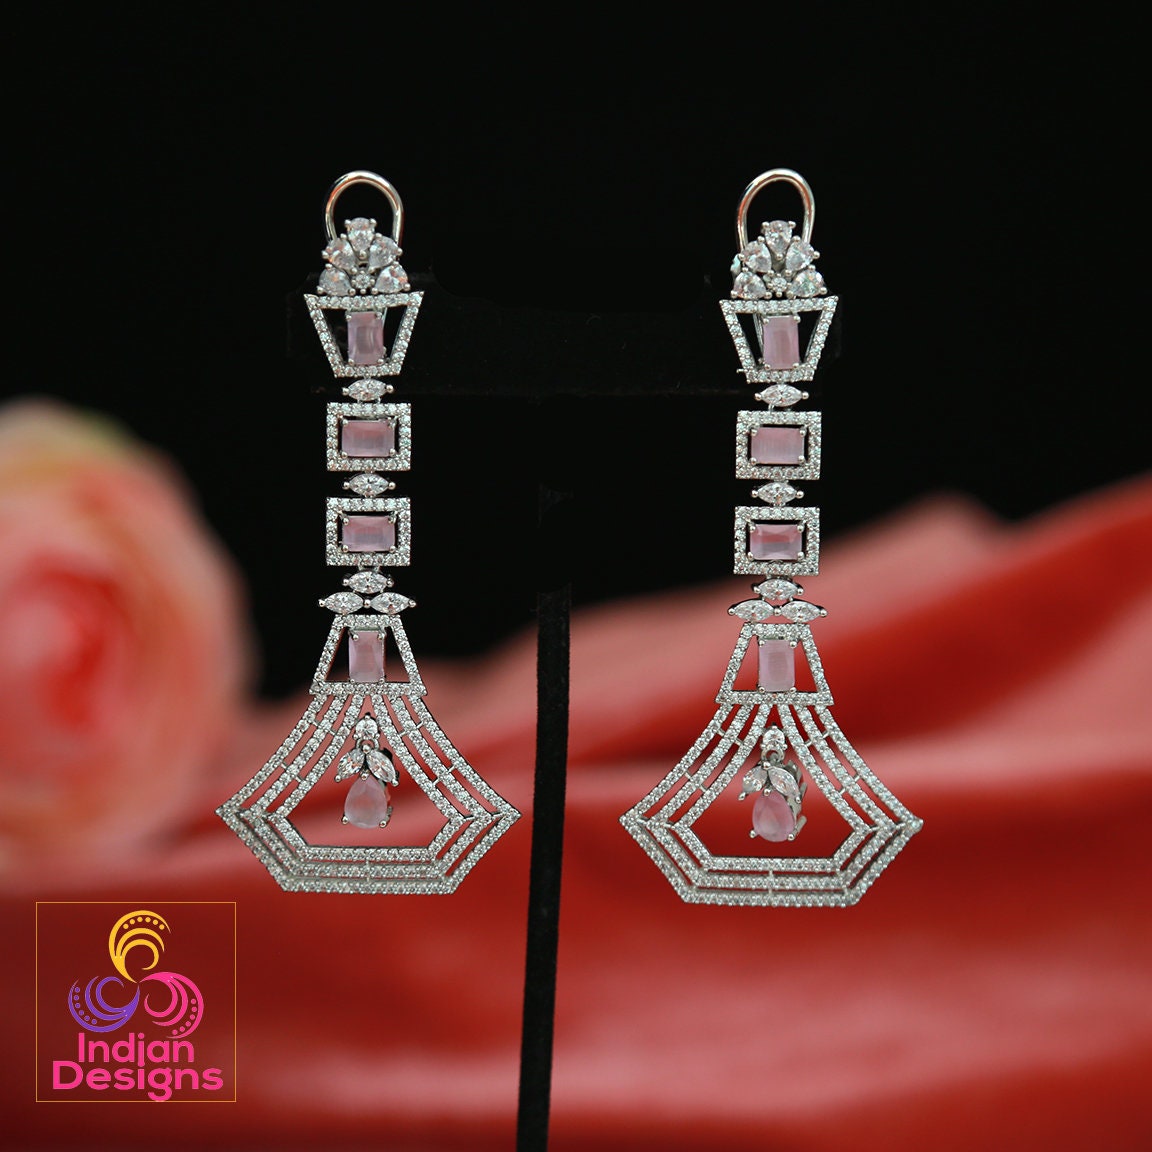 Buy Gold Earring Online at Best Price at Global Desi- 8905134902812